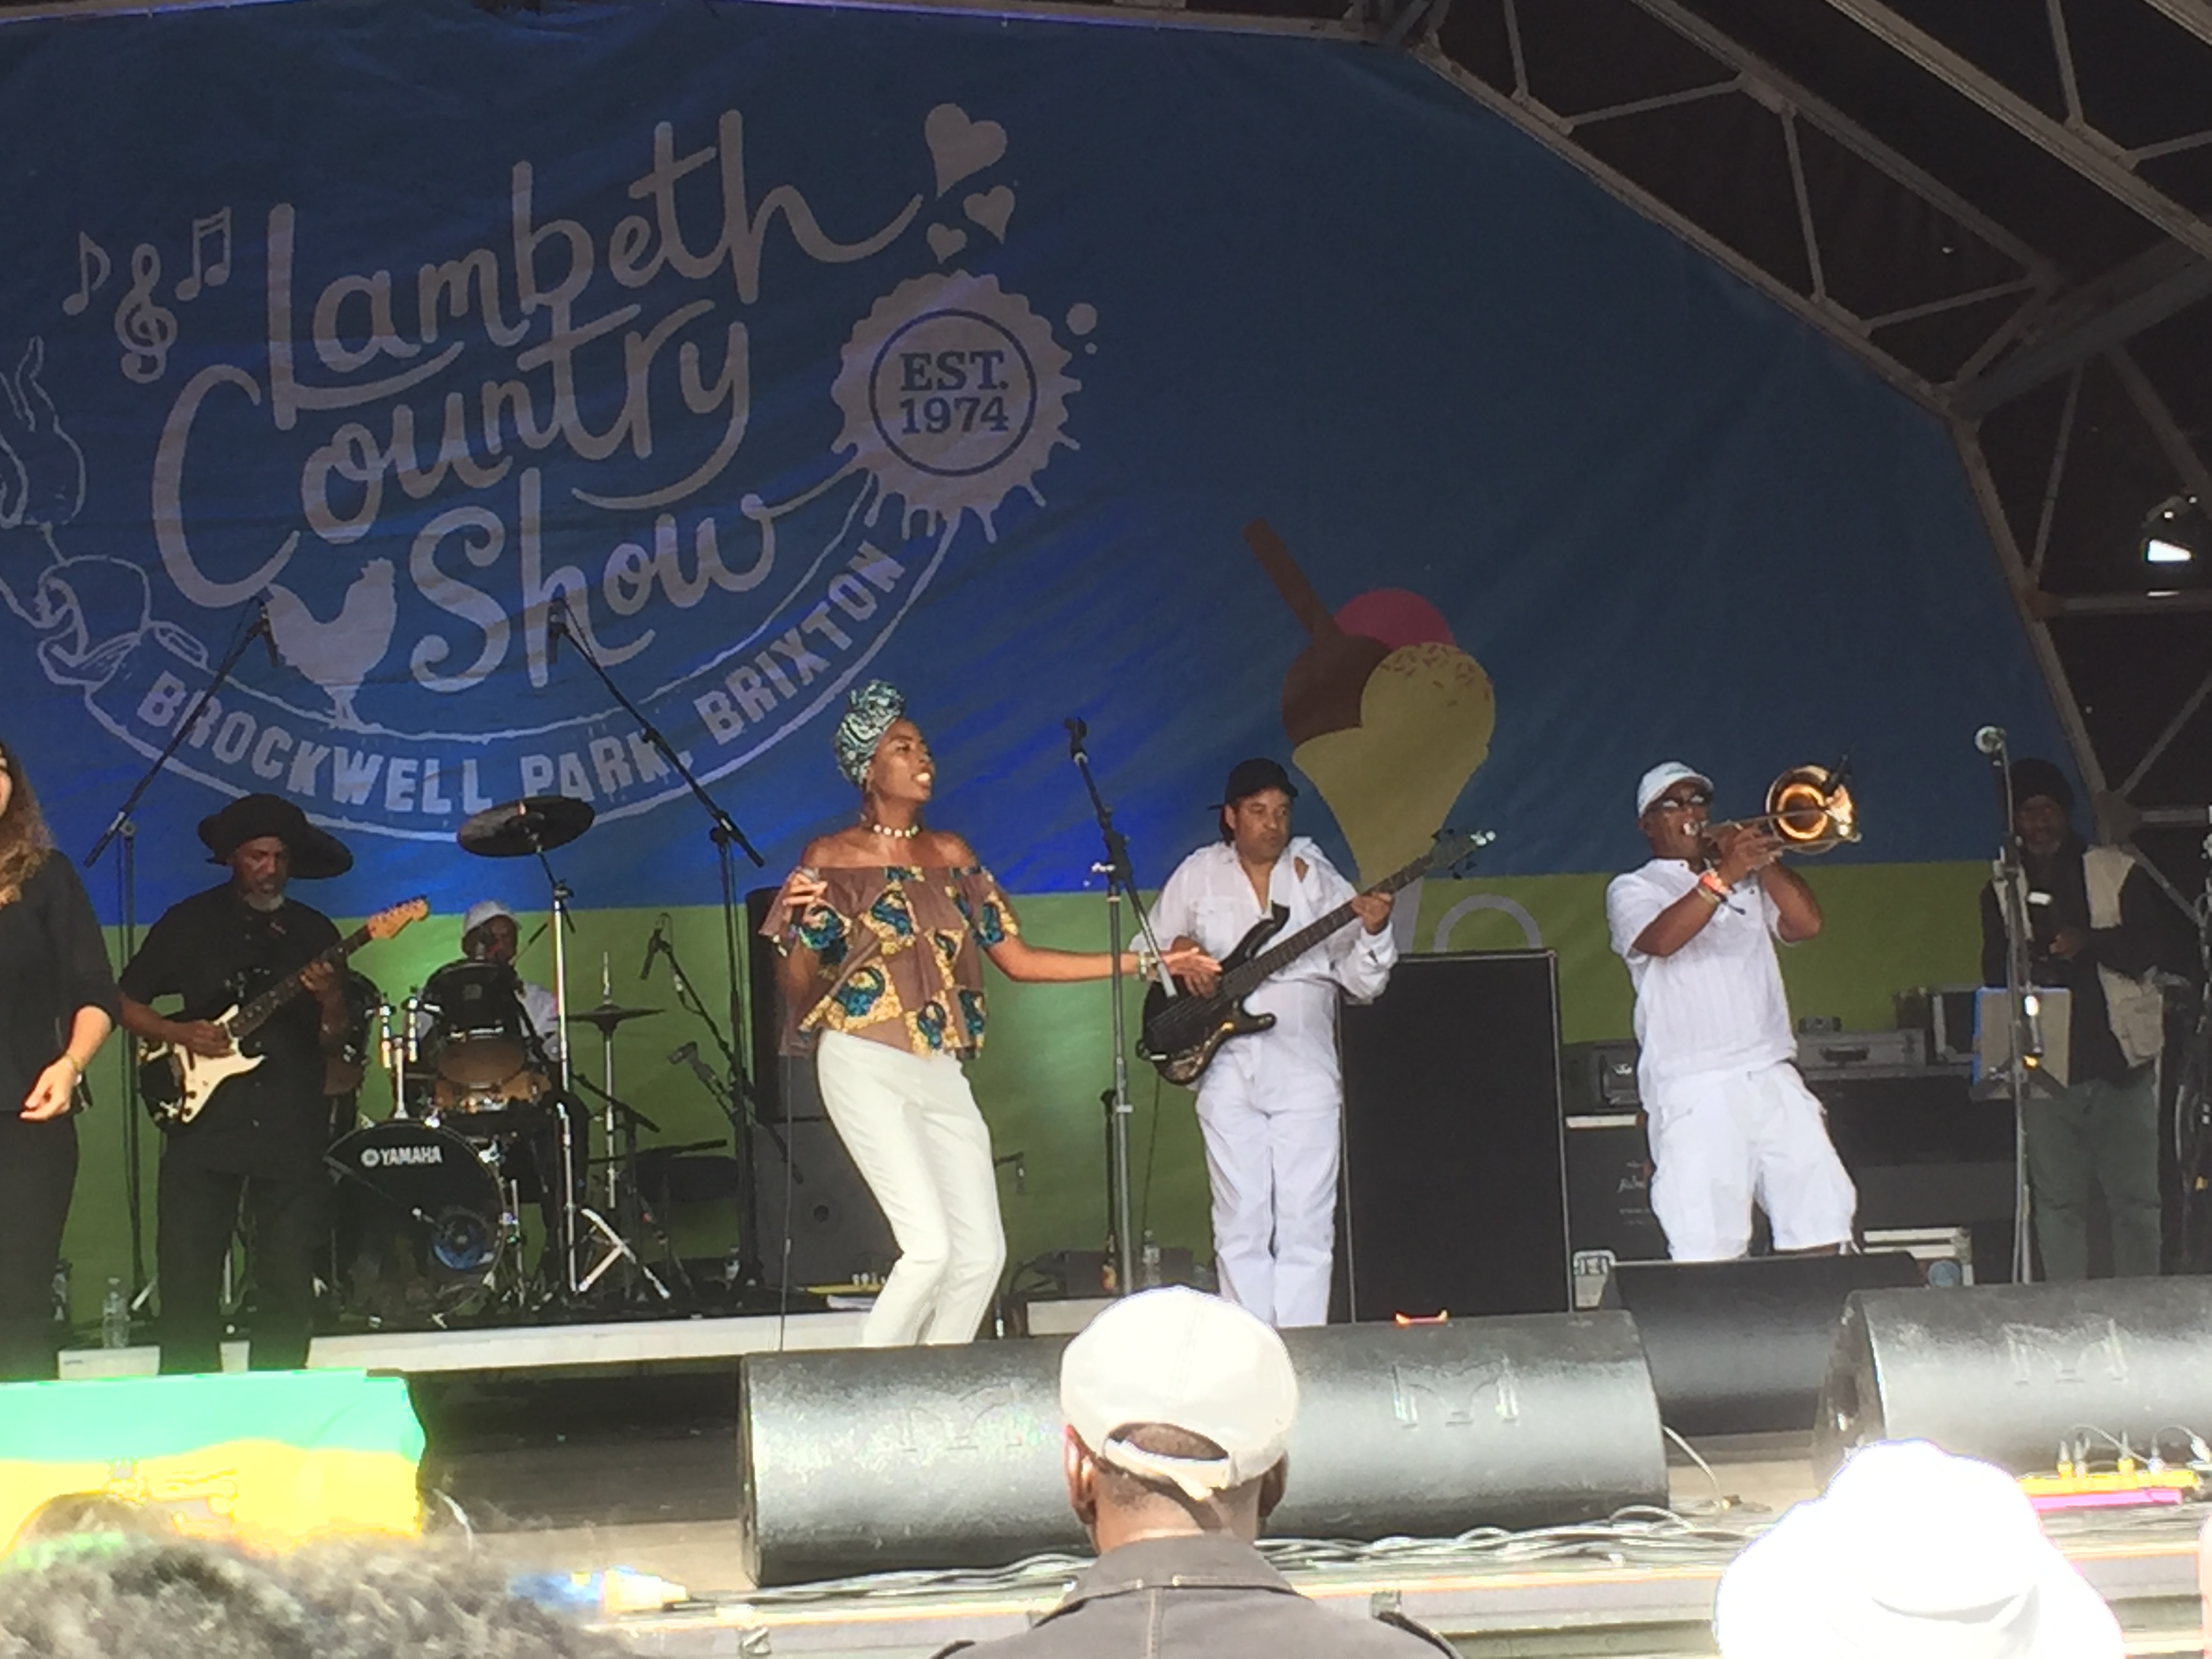 Teshay Makeda singing on stage at the Lambeth Country Show, accompanied by a couple of guitarists, a trumpet player and a drummer.